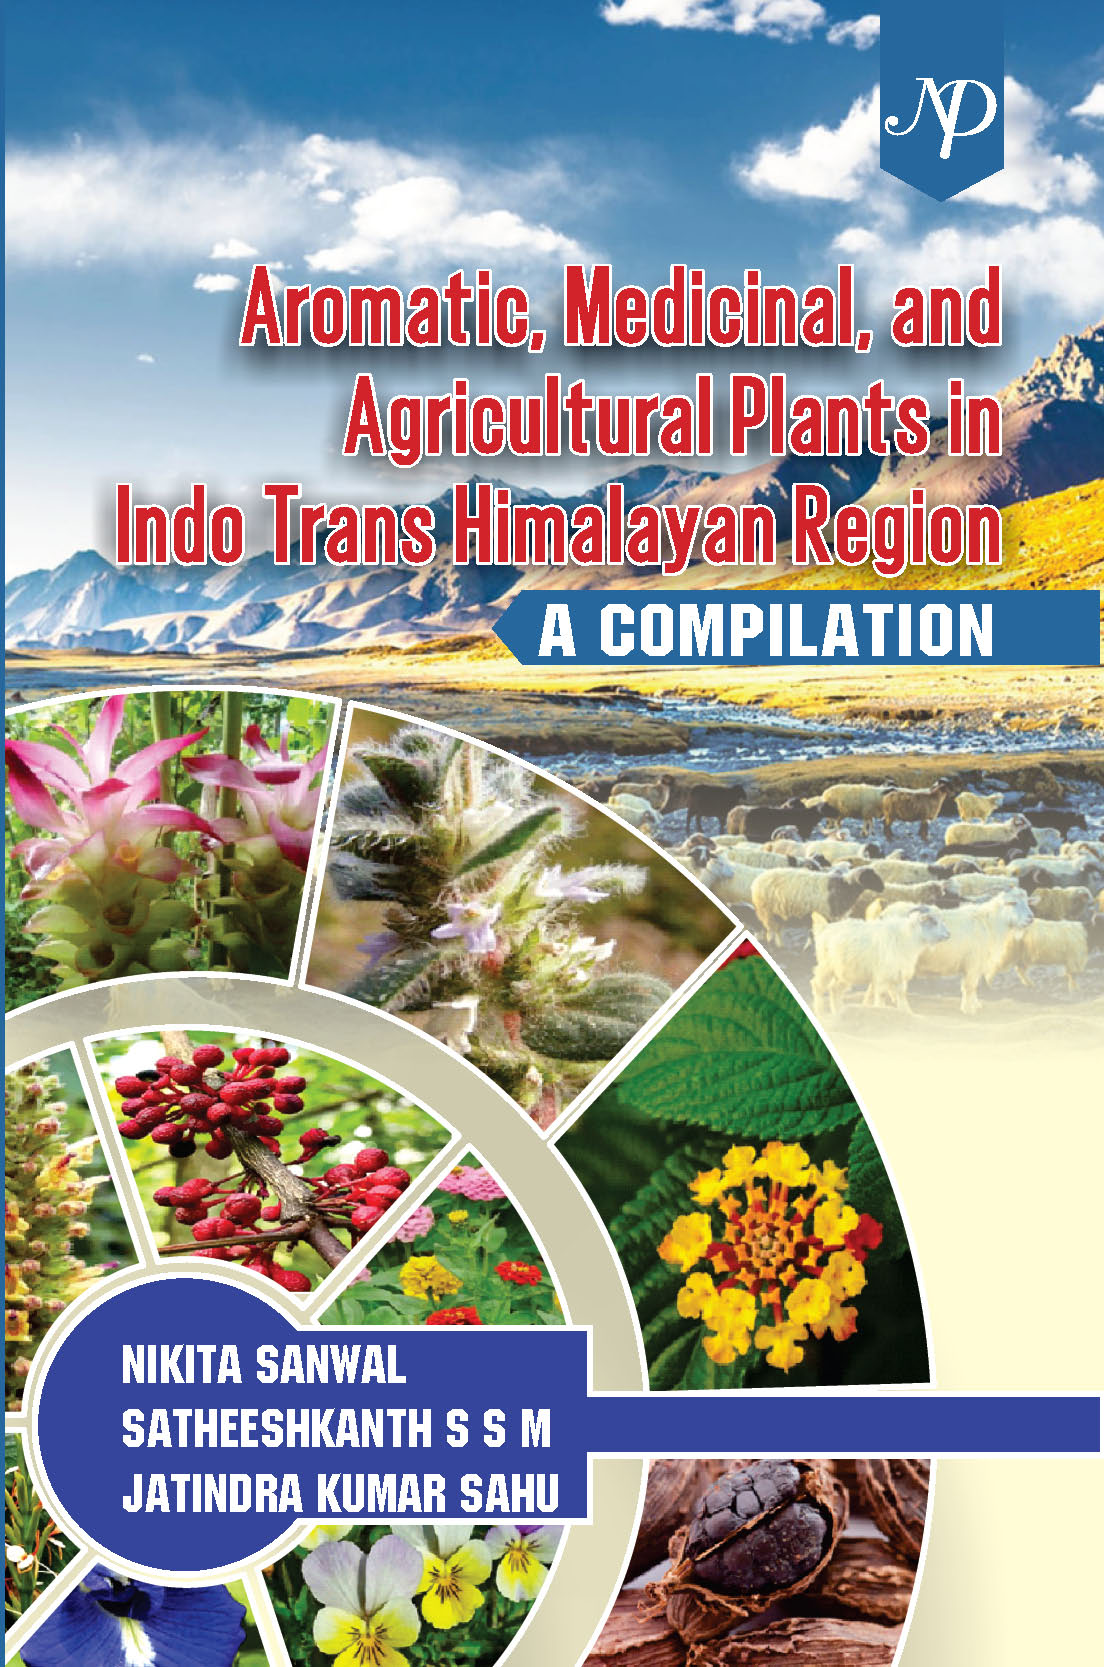 Aromatic, Medicinal and Agricultural Plants in Indo Trans Himalayan Region - A compilation